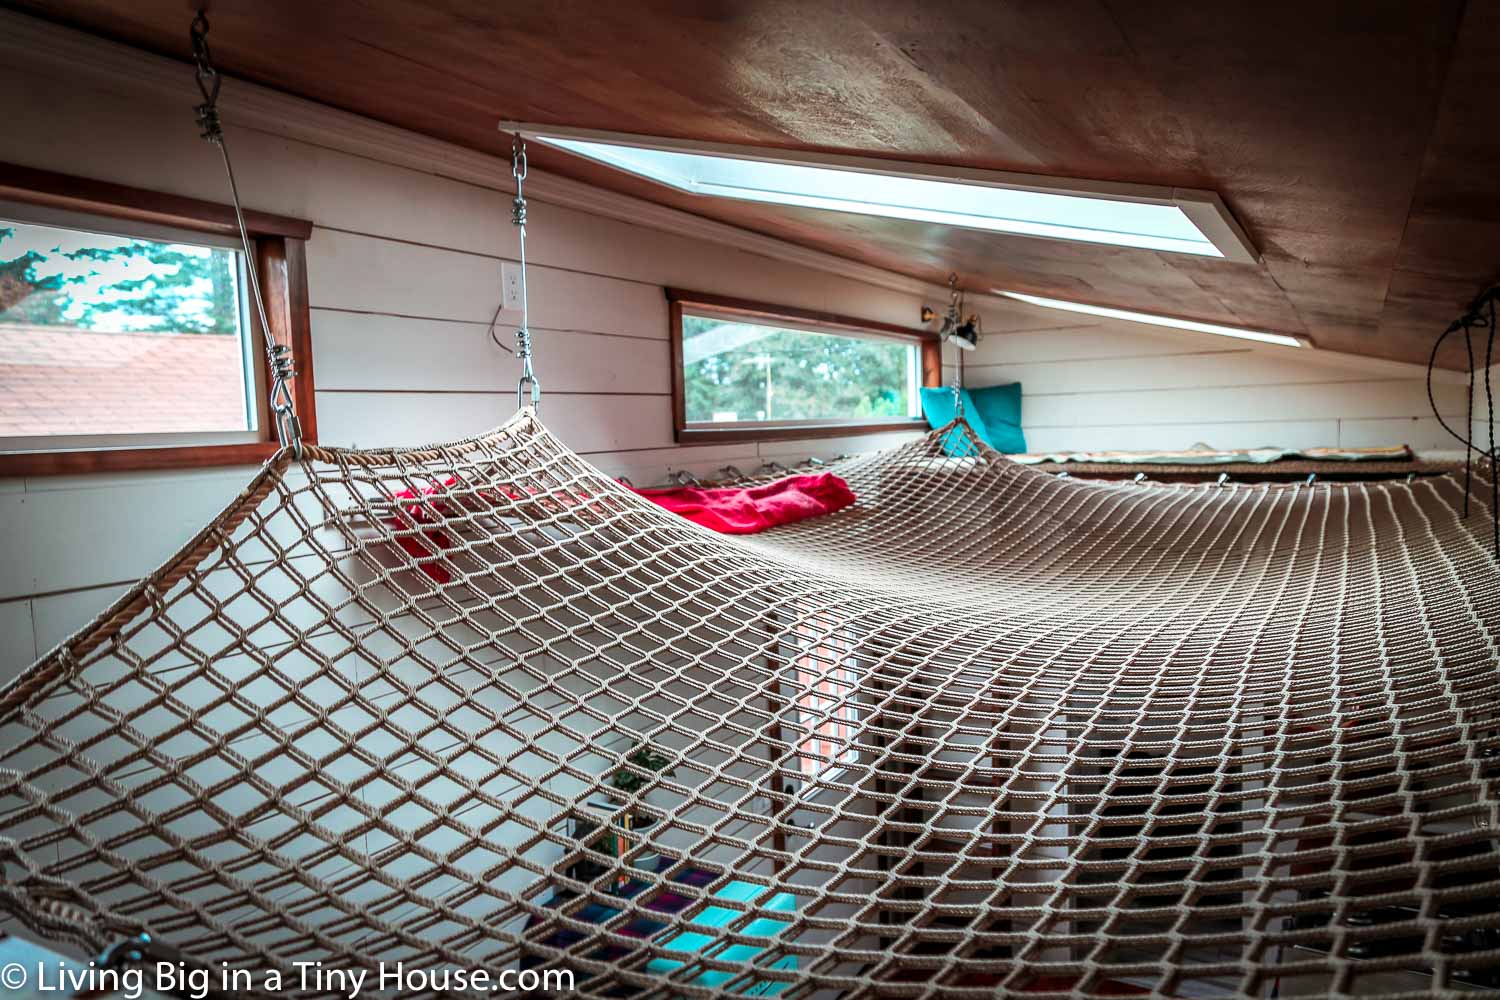 Living Big in a Tiny House - Amazing DIY Tiny House With Super Cool Loft  Hammock